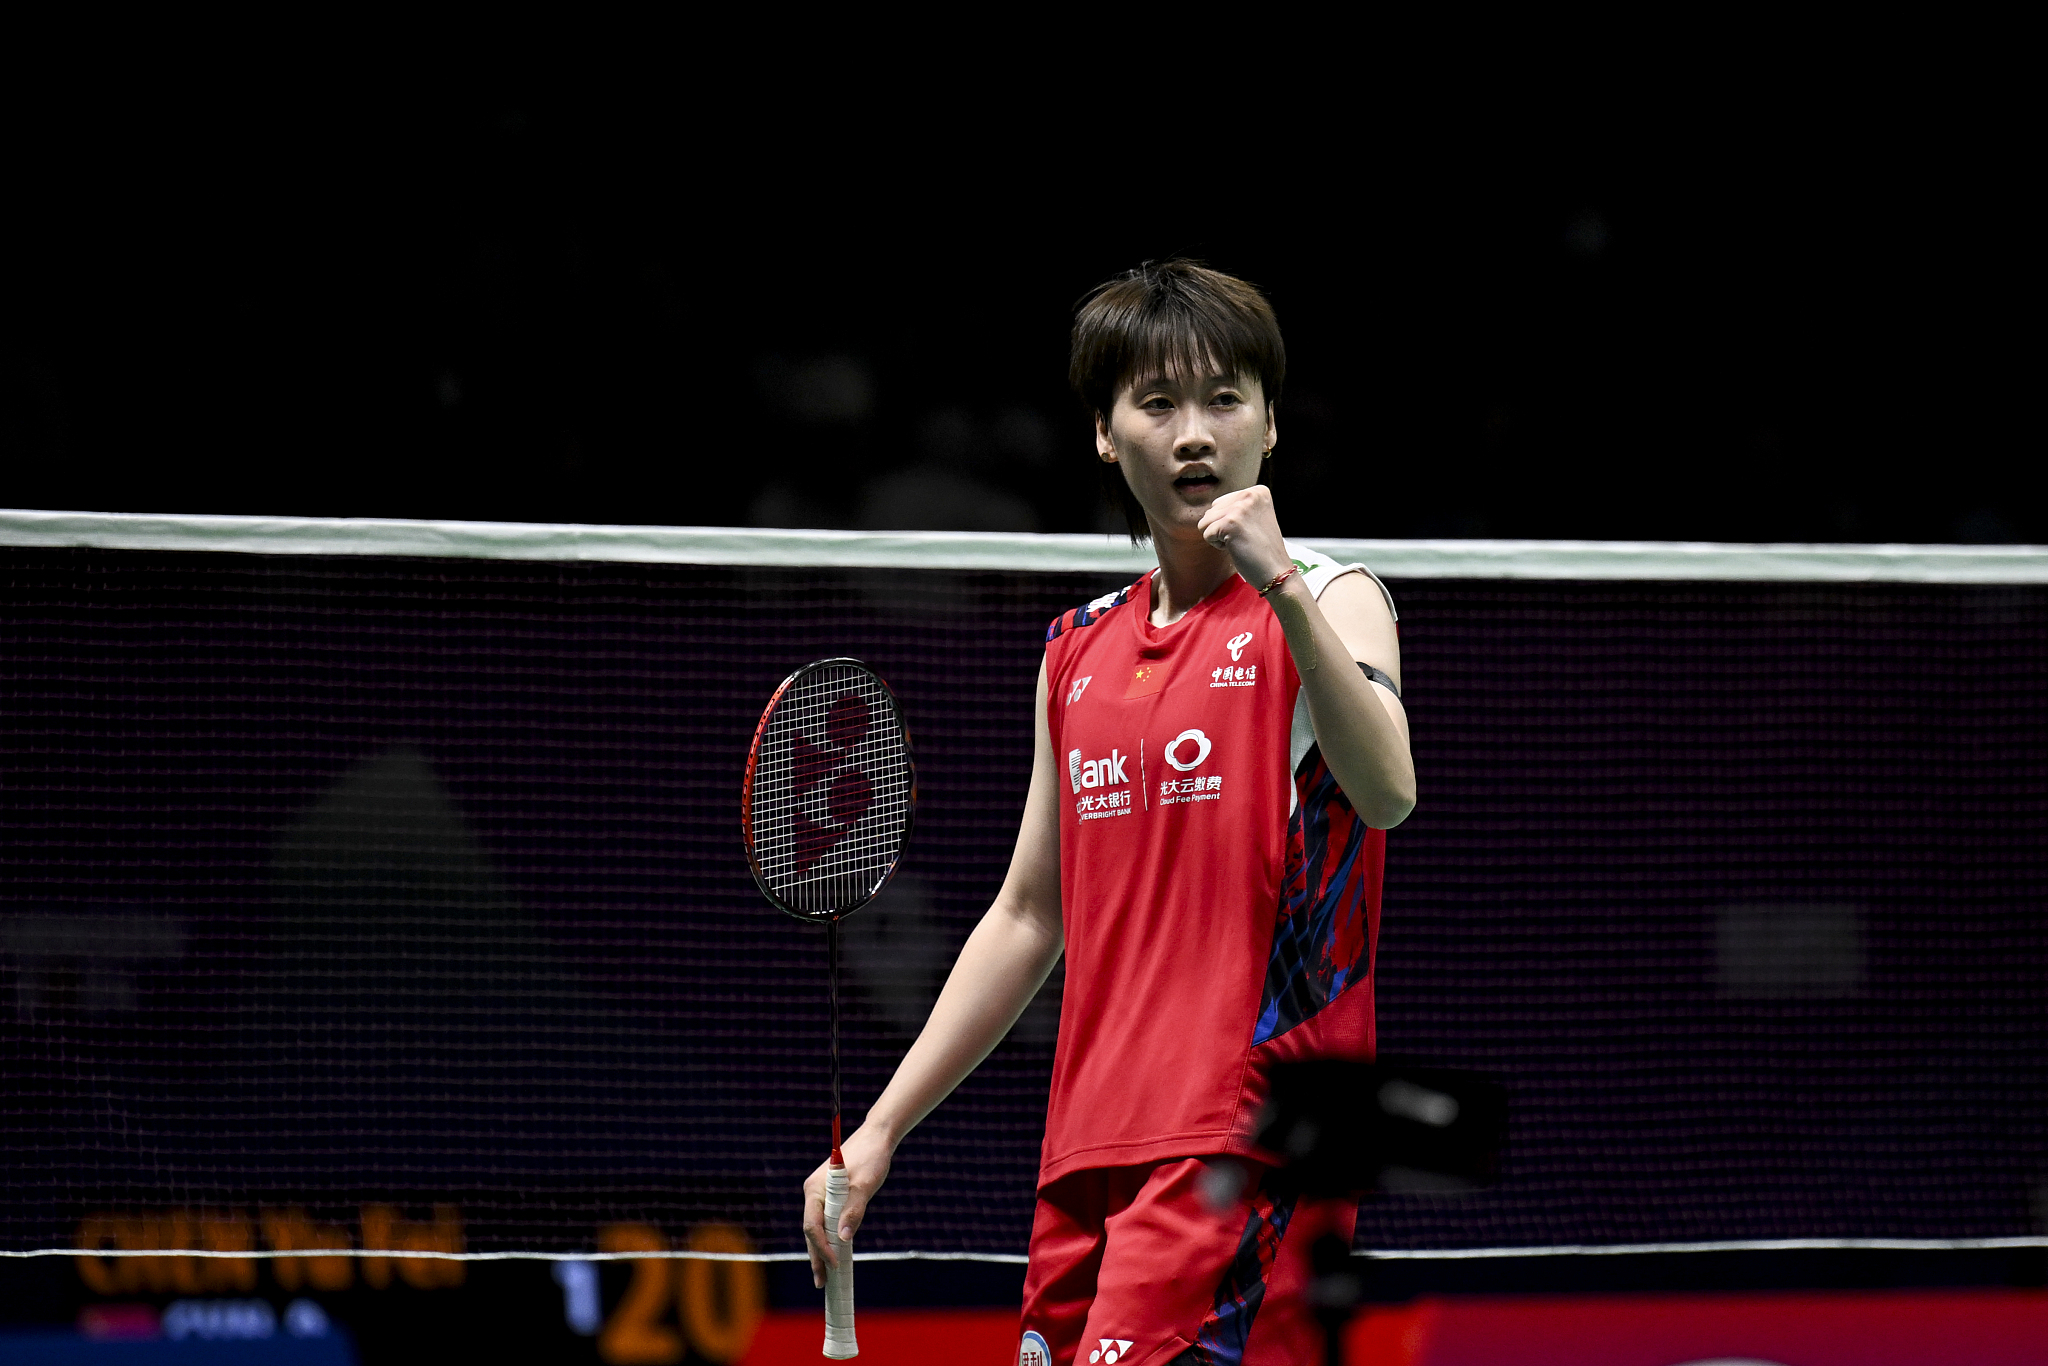 Chen Yufei of China celebrates her victory over Line Hojmark Kjaersfeldt of Denmark (not pictured) during the first-round women's singles match in the Uber Cup quarterfinal in Chengdu, China, May 2, 2024. /CFP 